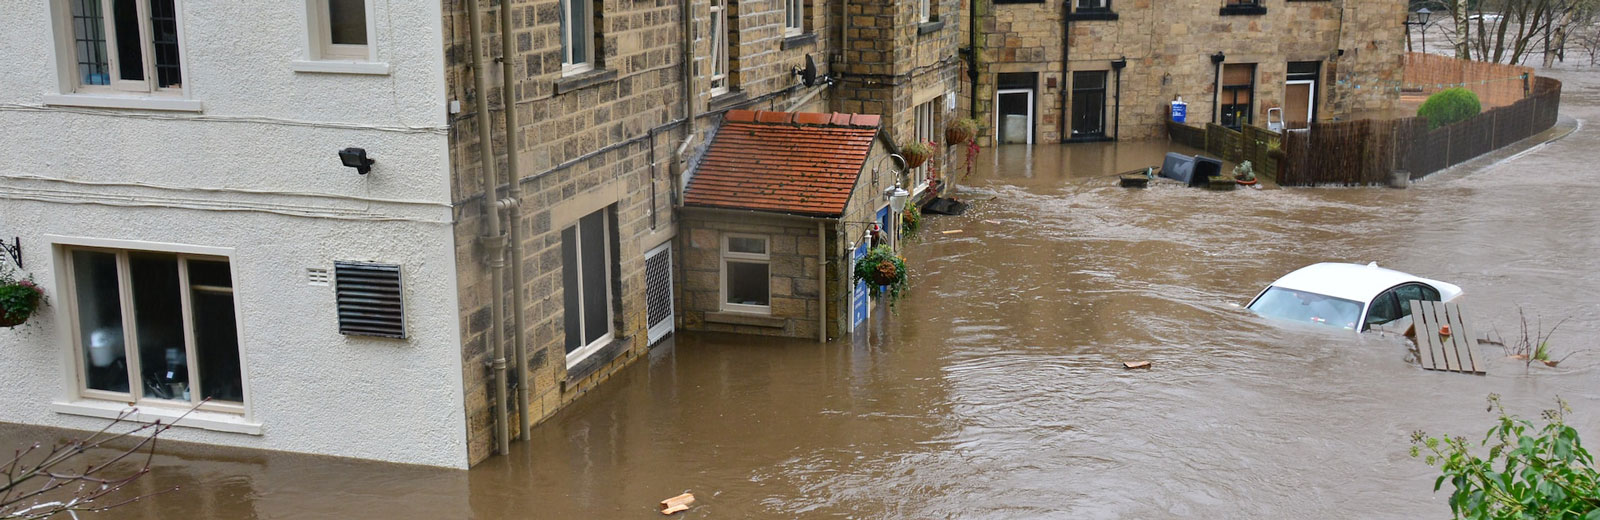 Flooding in Yorkshire